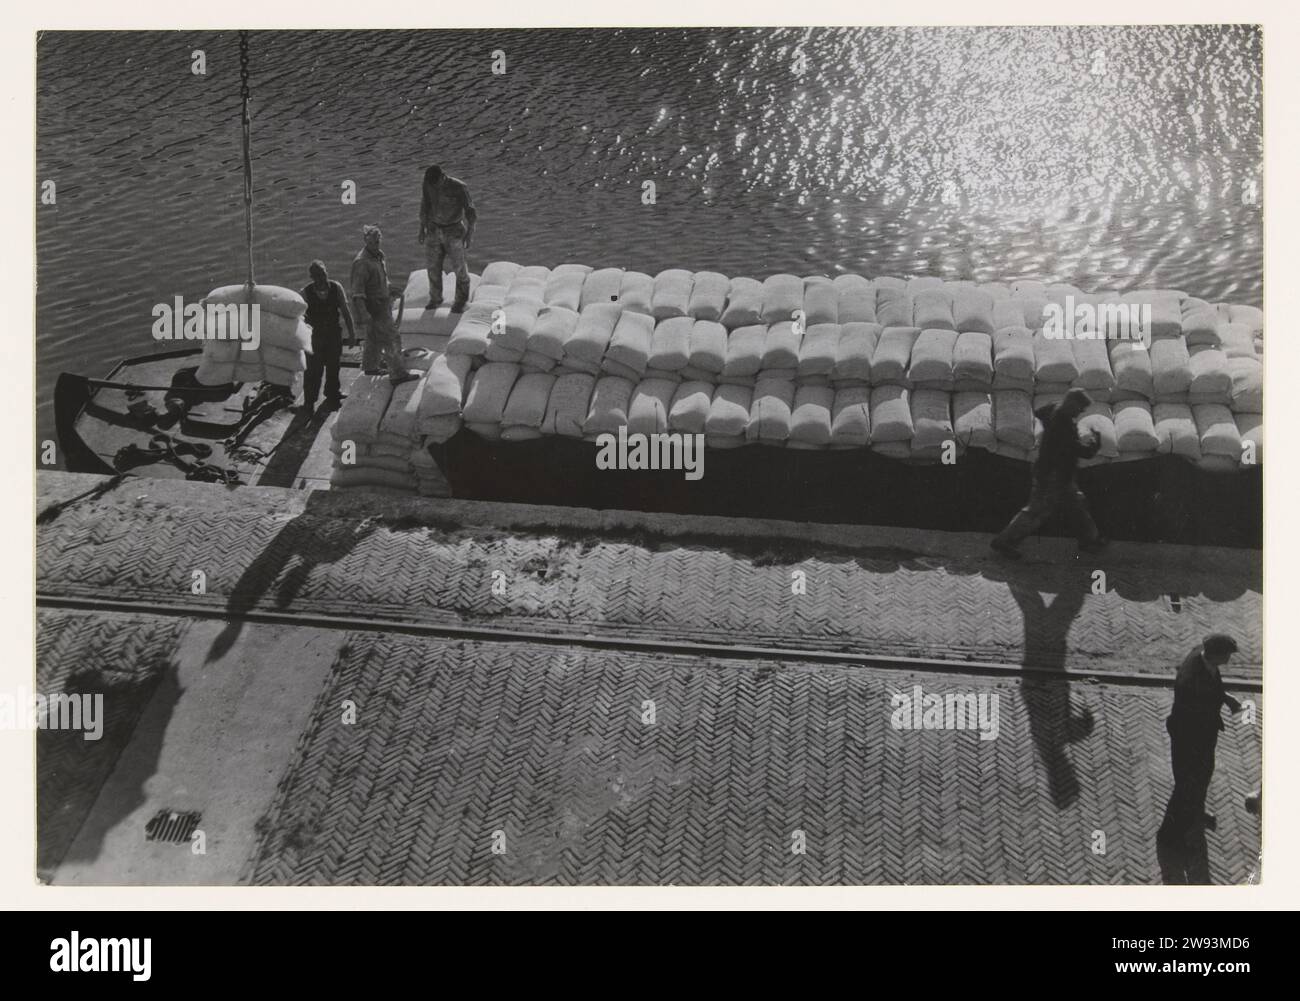 Allied food aid: the unloading of a deck barge, 1945 documentary photographs On a quay in the Rotterdam (?) Haven, a full deck barge is loaded with bags unloaded by three port workers. The first pockets are hoisted from the deck barge against the background of the water and with the quay with ankle track in the foreground. The deck barges sailed from the Allied 'Liberty' cargo ships to the warehouses where the food from England and America was stored.  photographic support Stock Photo